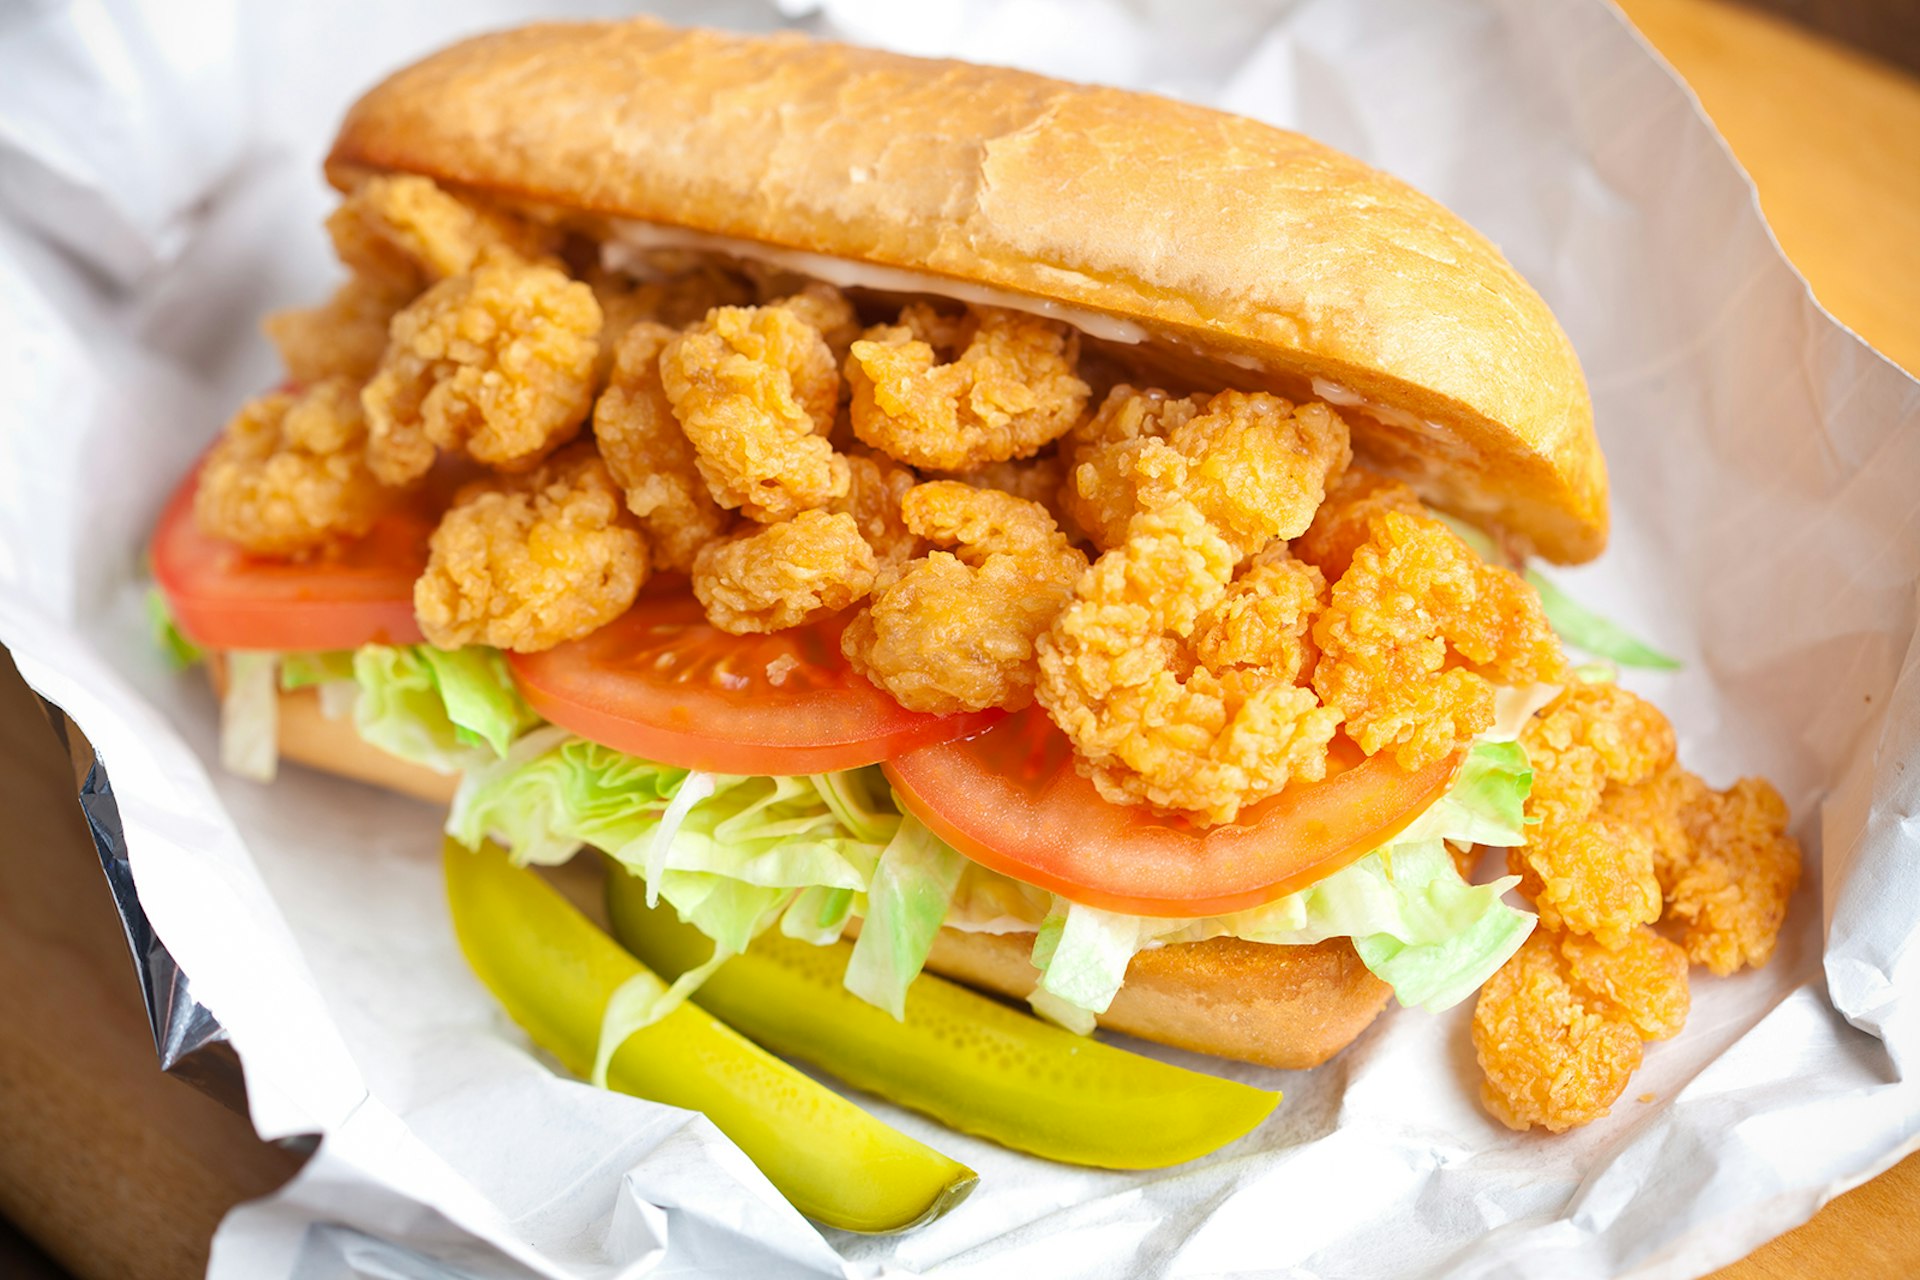 Shrimp po' boy sandwich on white paper with two pickles © kcline / Getty Images